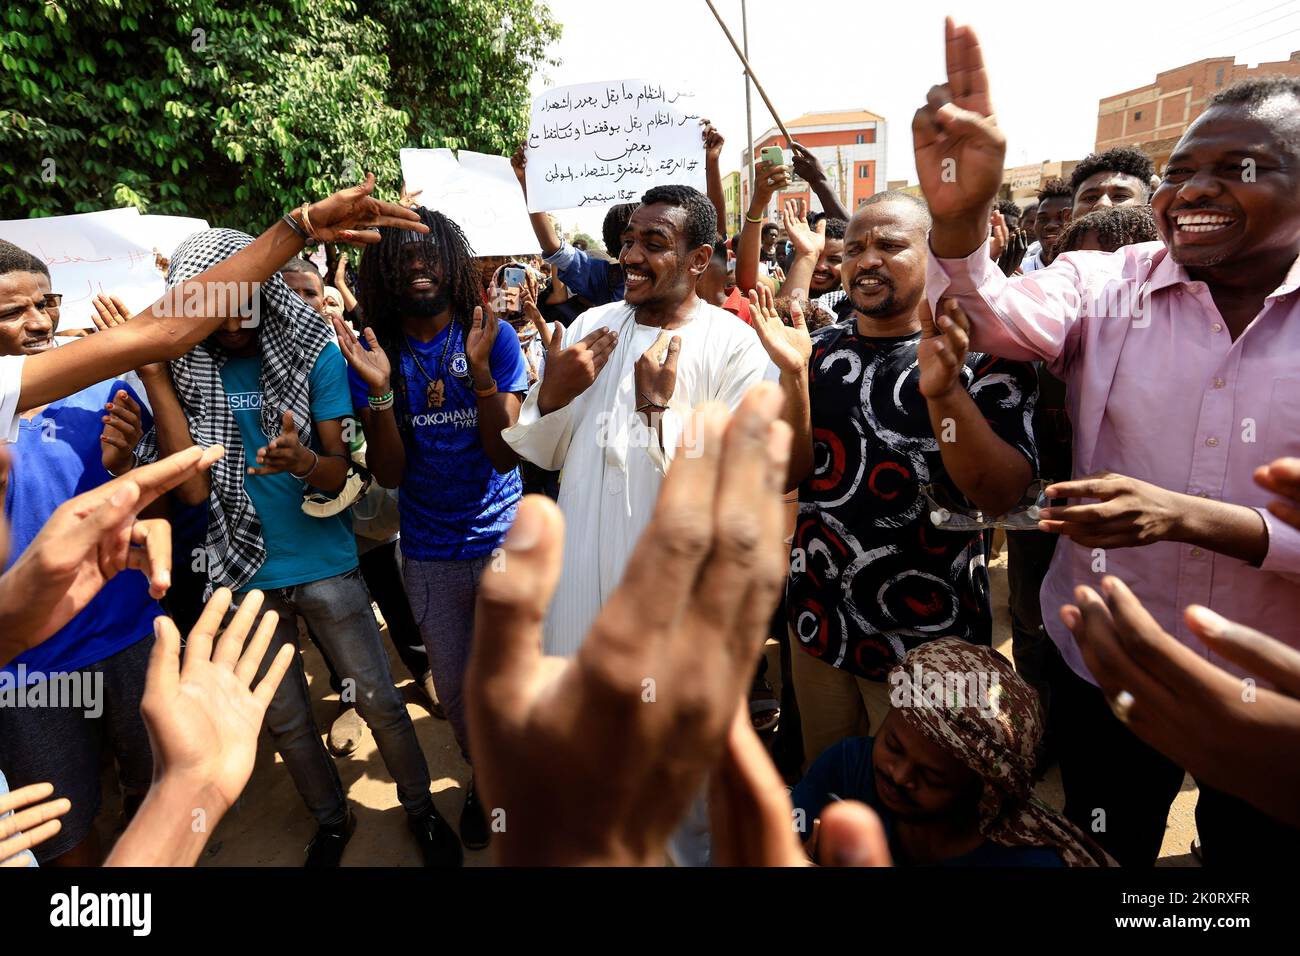 Protesters react as they take part in a rally against the military rule following the last coup, in Khartoum, Sudan September 13, 2022. REUTERS/Mohamed Nureldin Abdallah Stock Photo